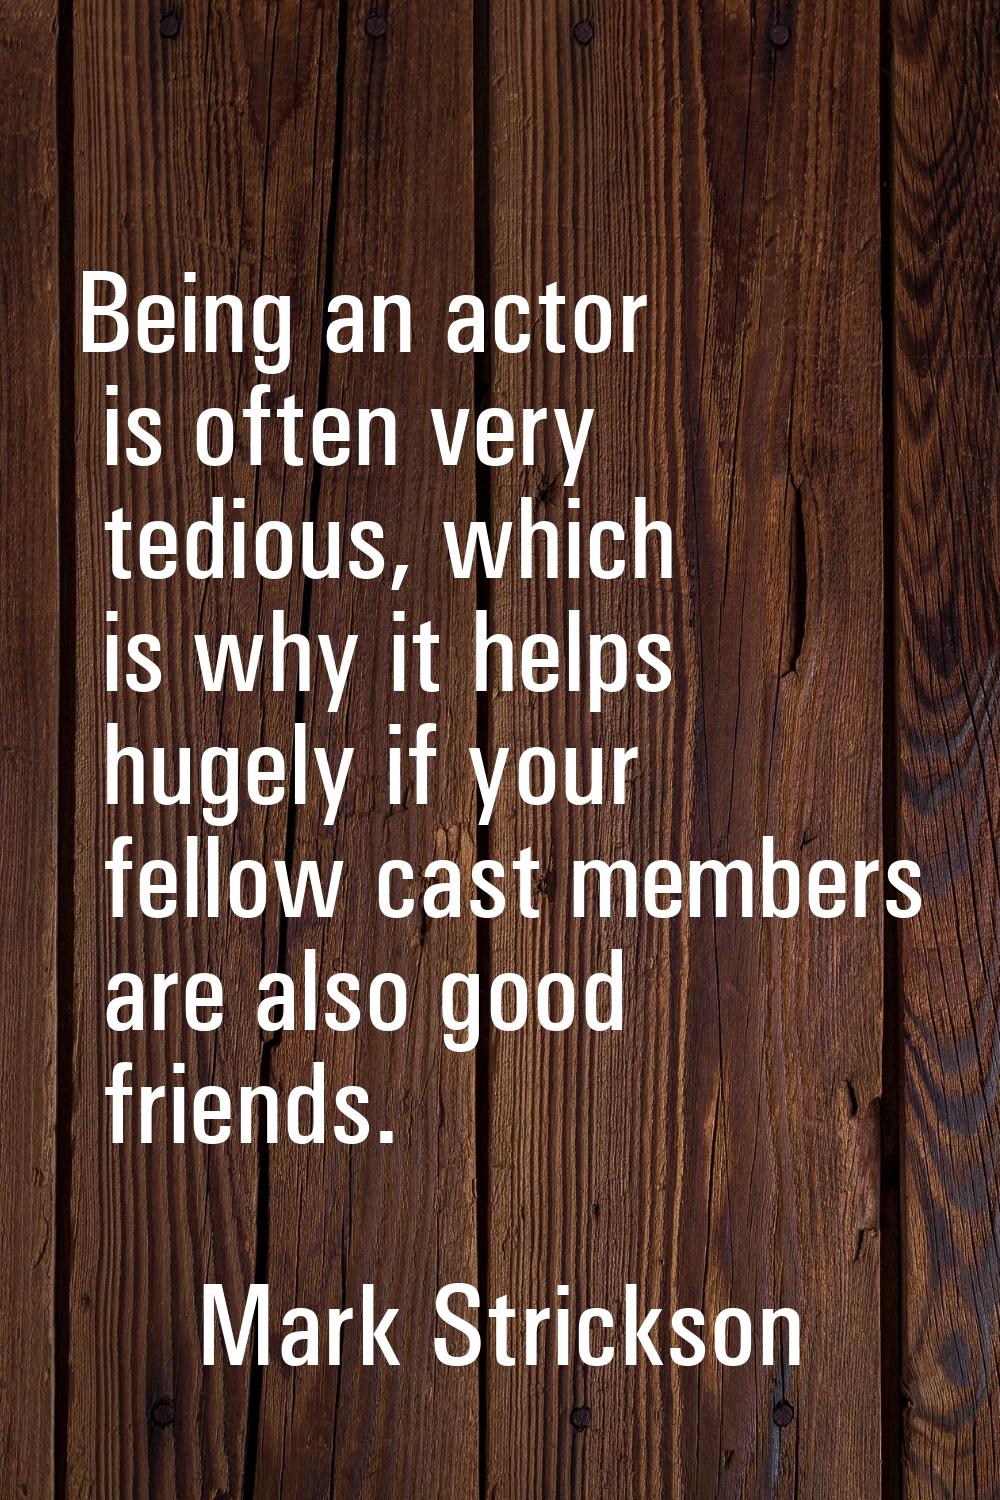 Being an actor is often very tedious, which is why it helps hugely if your fellow cast members are 